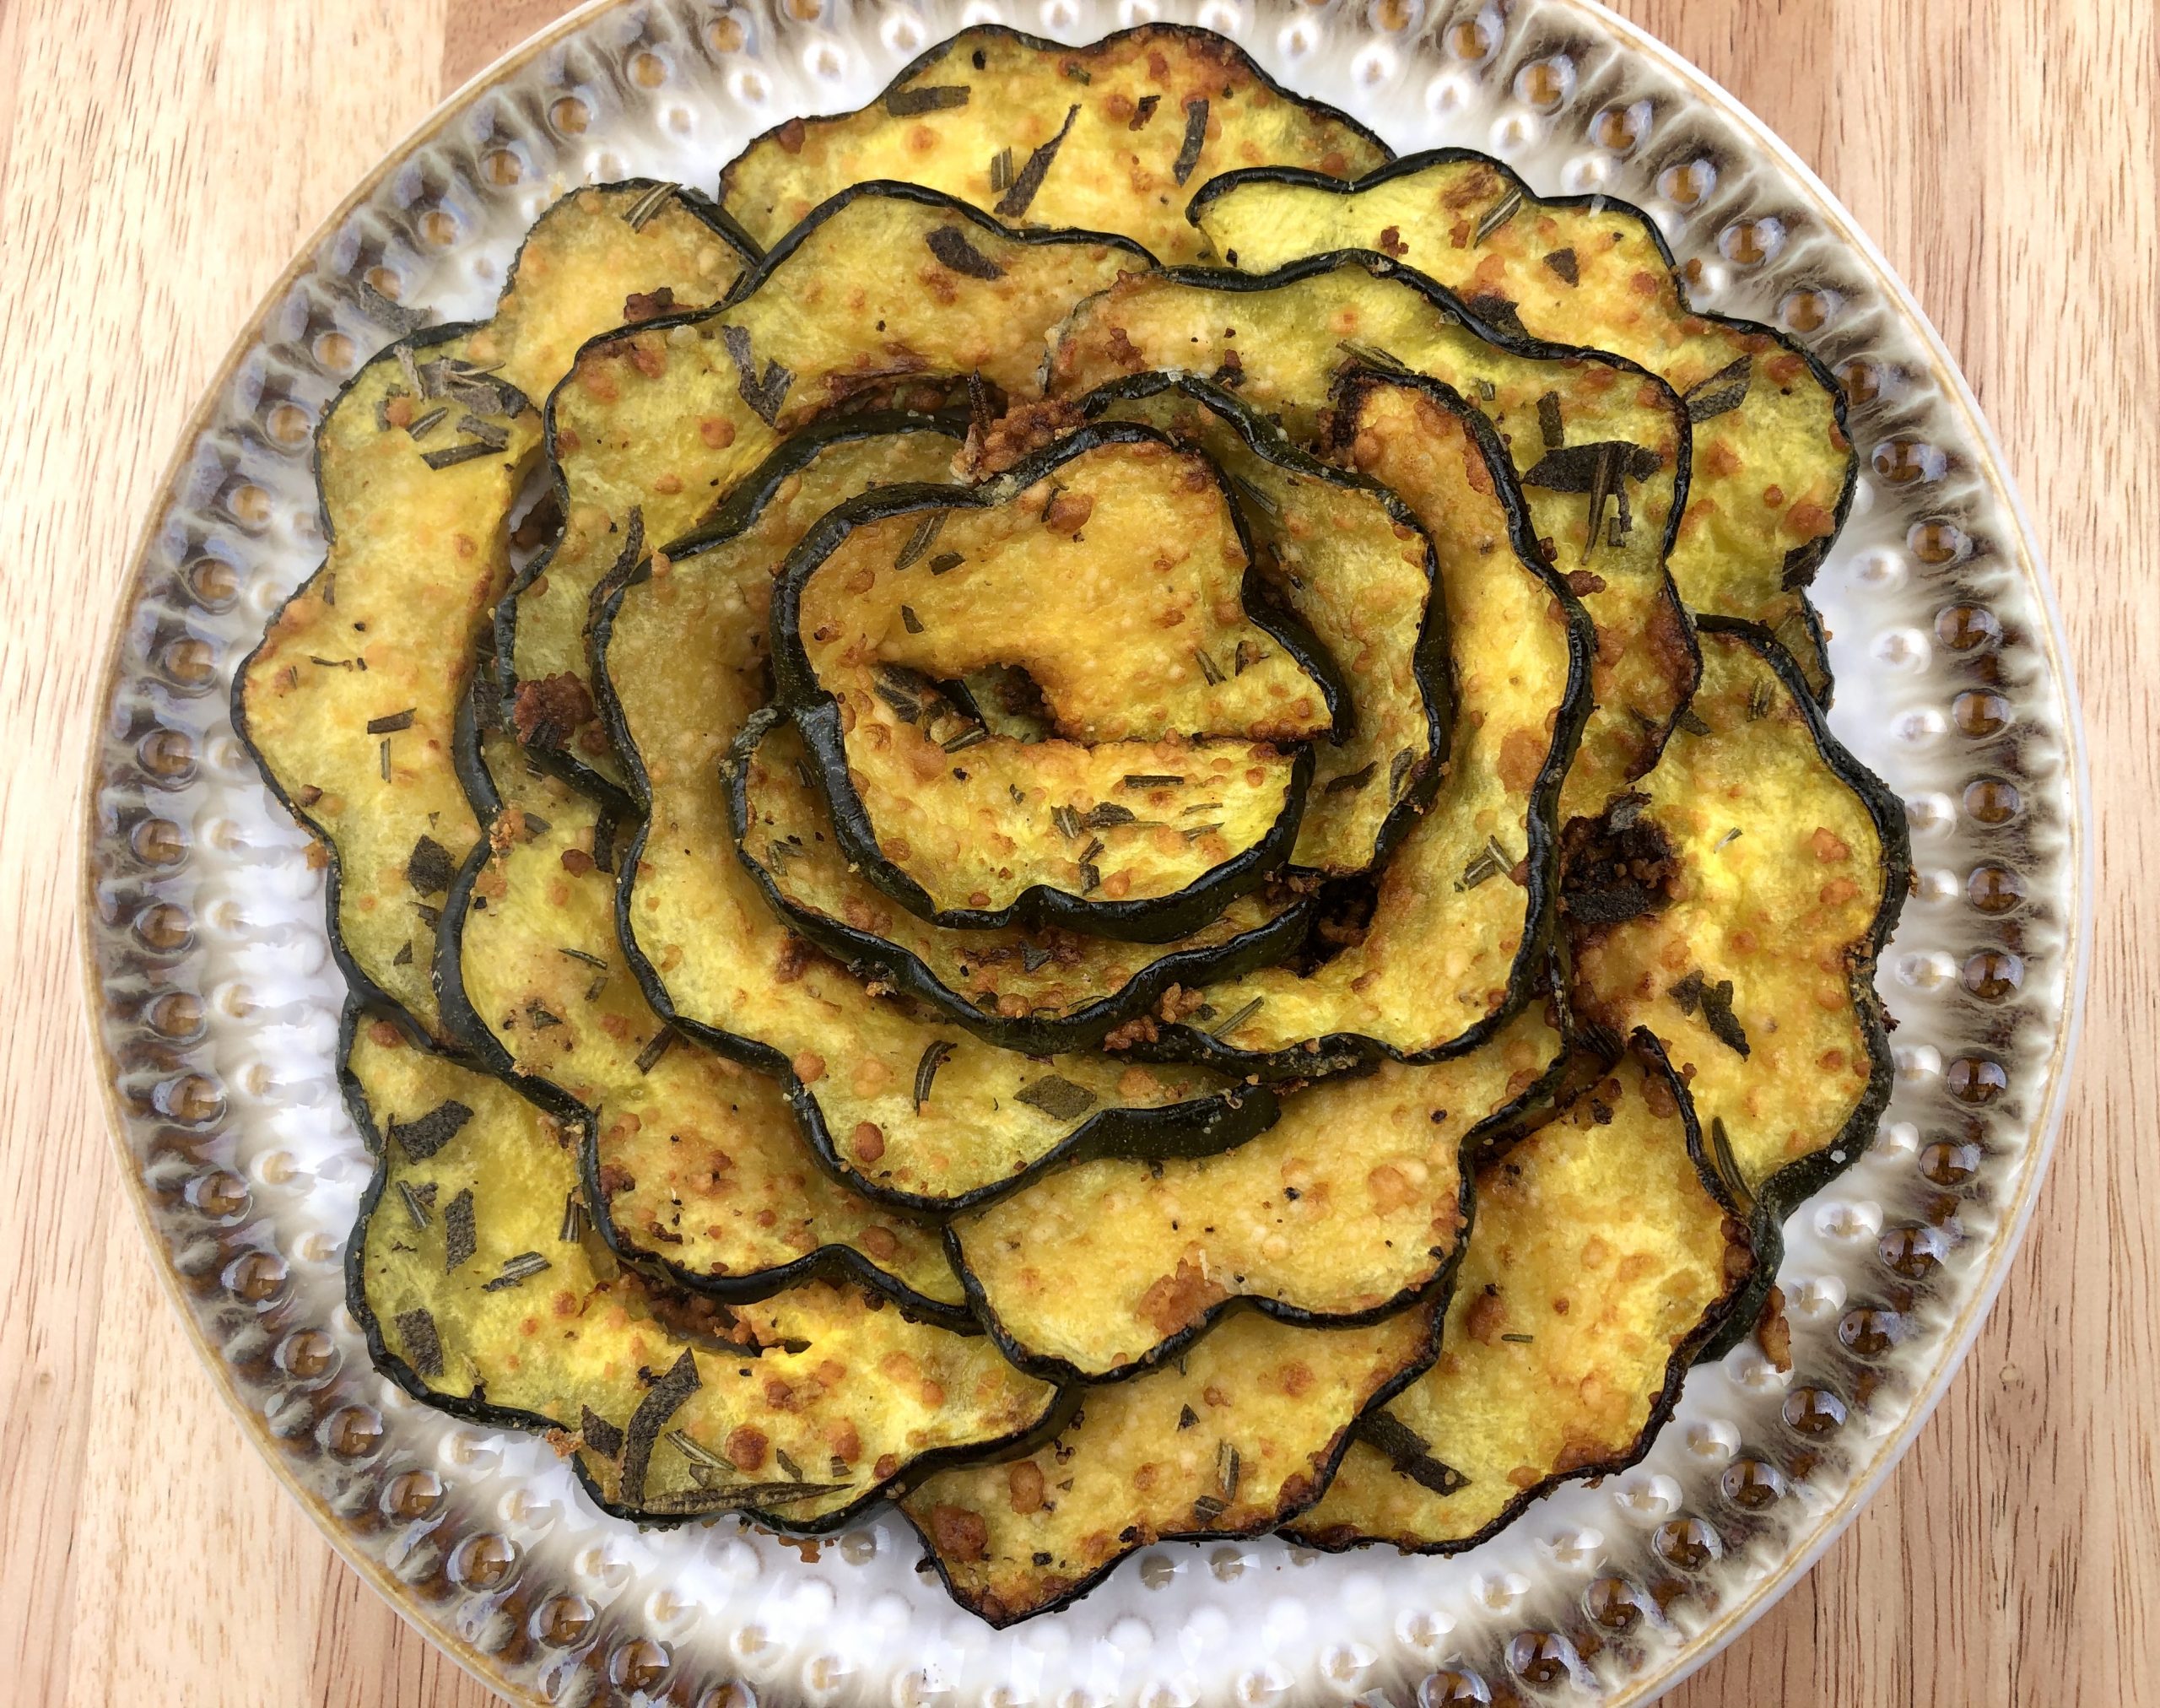 Herb-Baked Acorn Squash with Parmesan